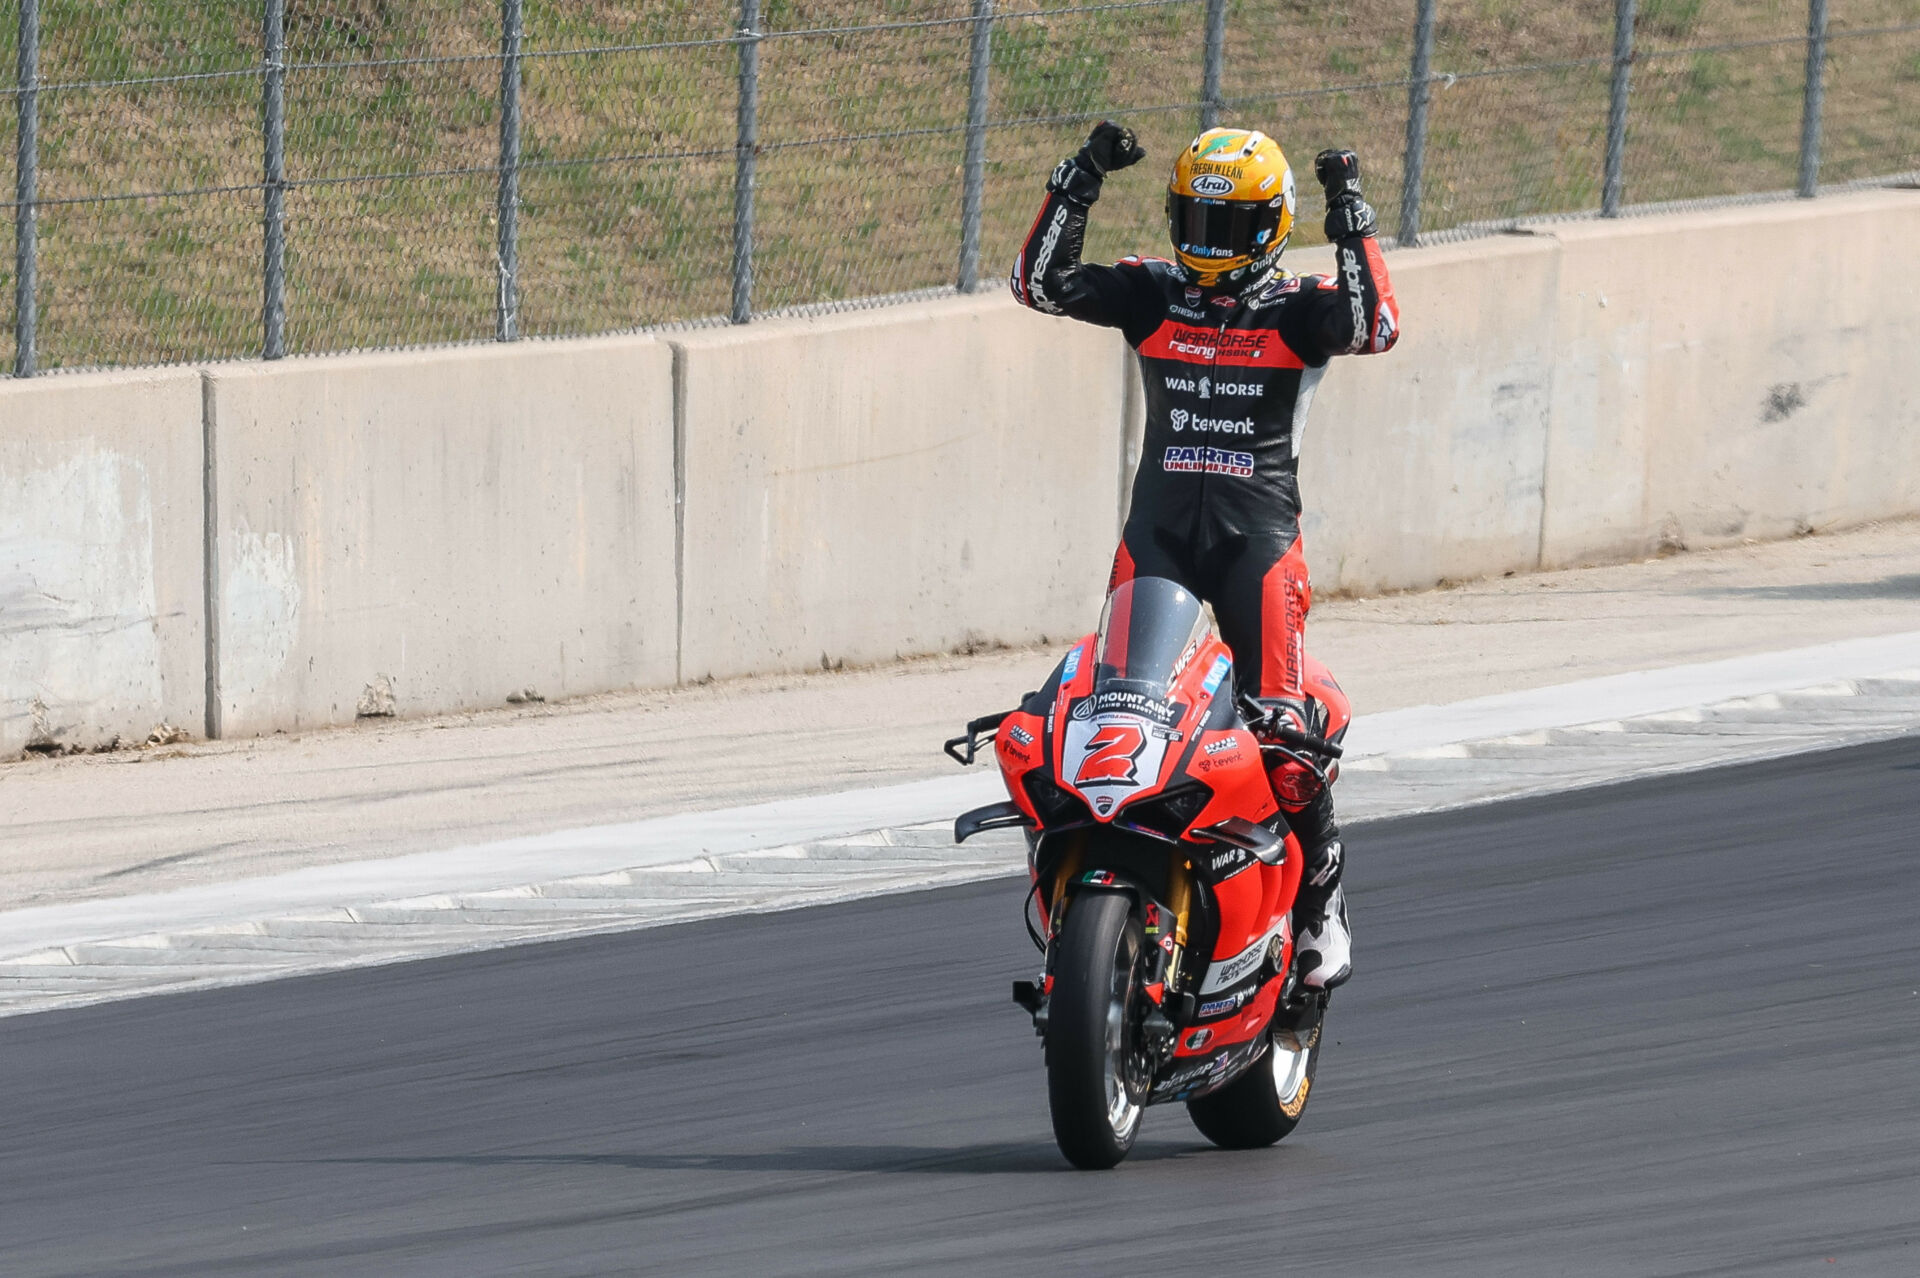 Fearless Motorcycle Racers Hit 220 MPH Speeds At America's